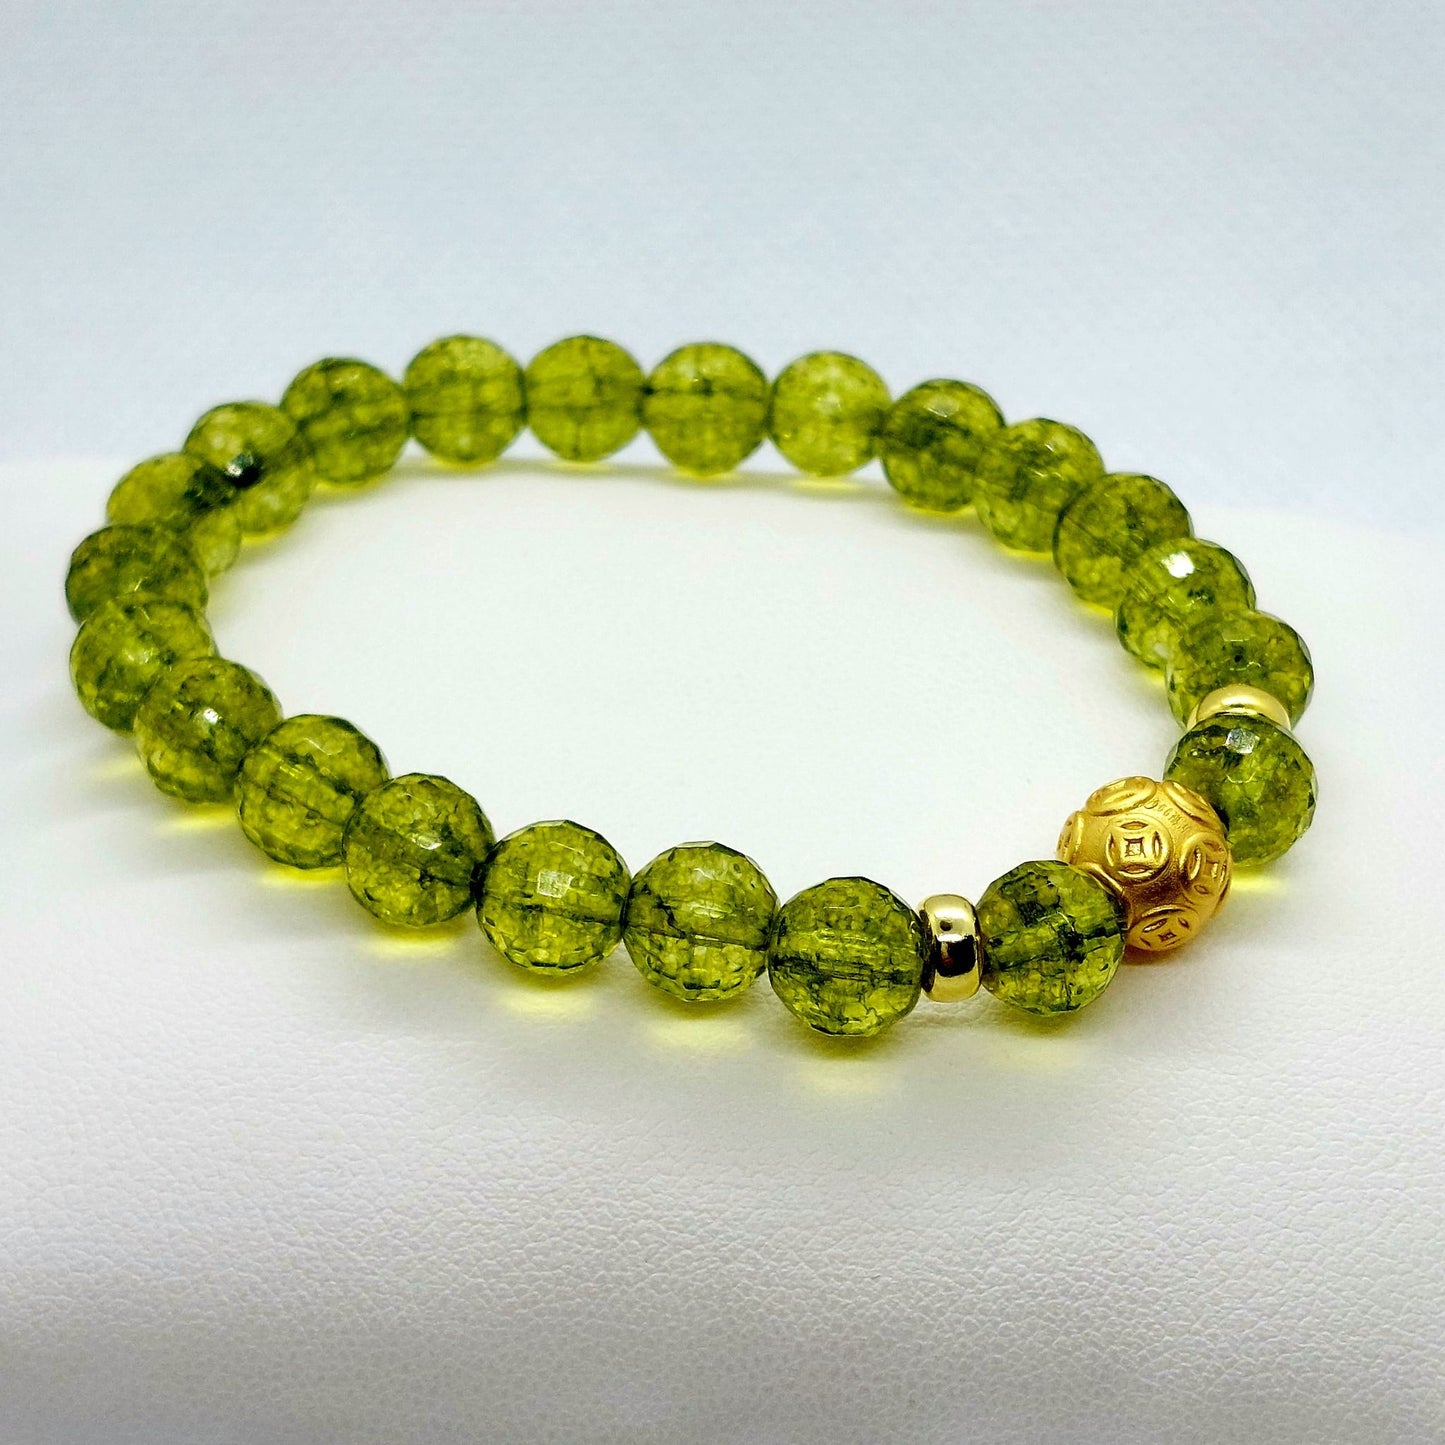 Natural Faceted Peridot Bracelet - 8mm